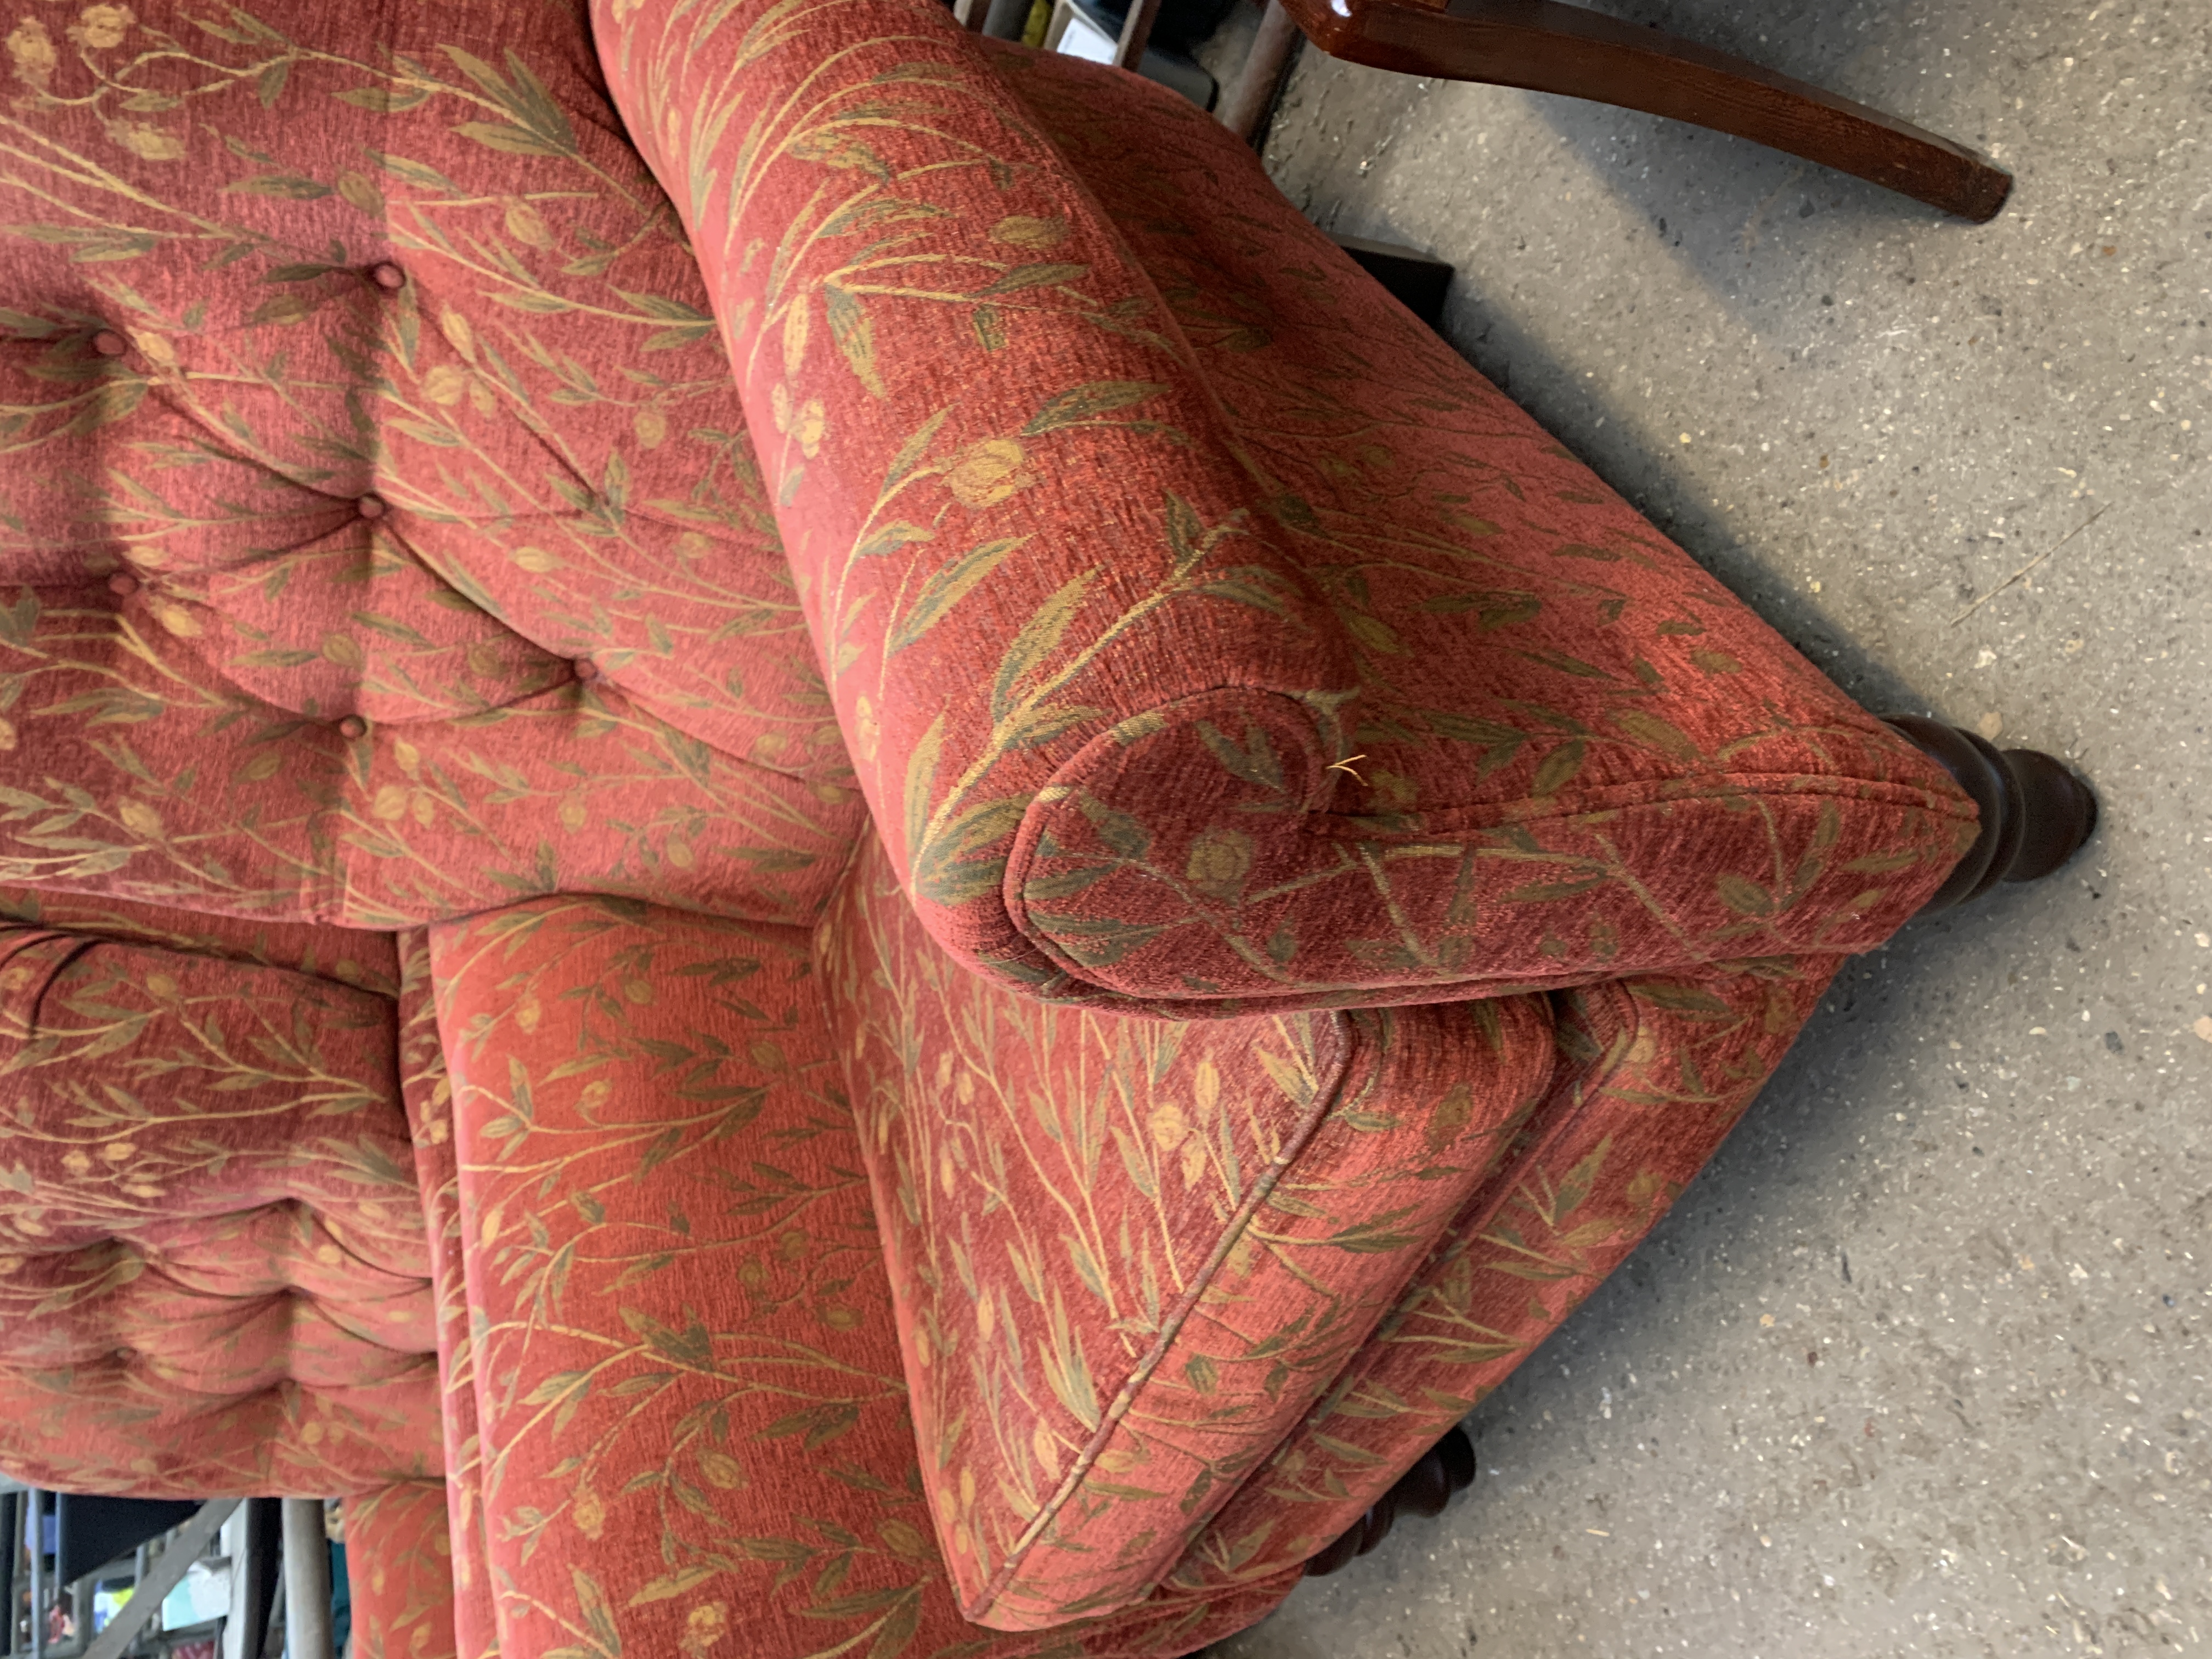 Two armchairs and an ottoman upholstered in dark red and gold floral design. - Image 3 of 6